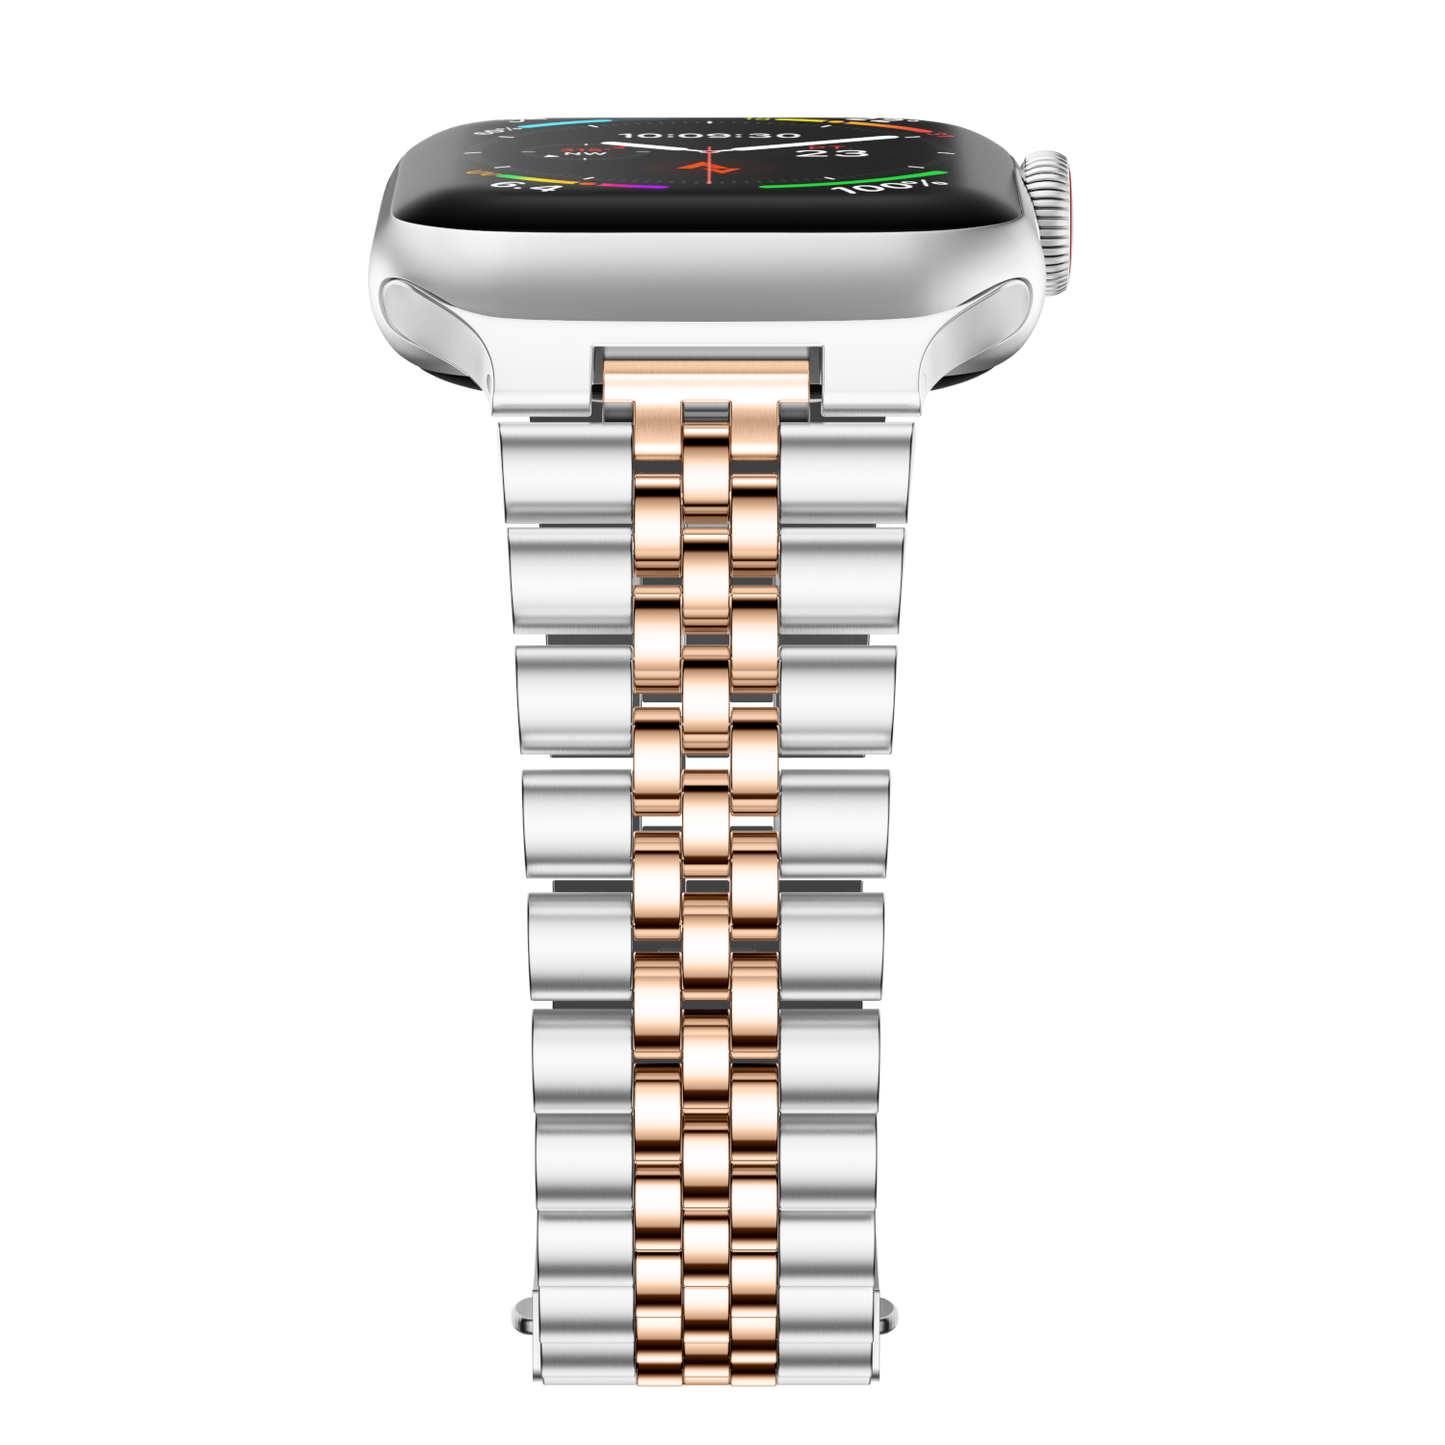 Stainless Steel Link Bracelet Band - The Perth in Silver and Rose - Compatible with Apple Watch Size 42mm to 45mm - Friendie Pty Ltd